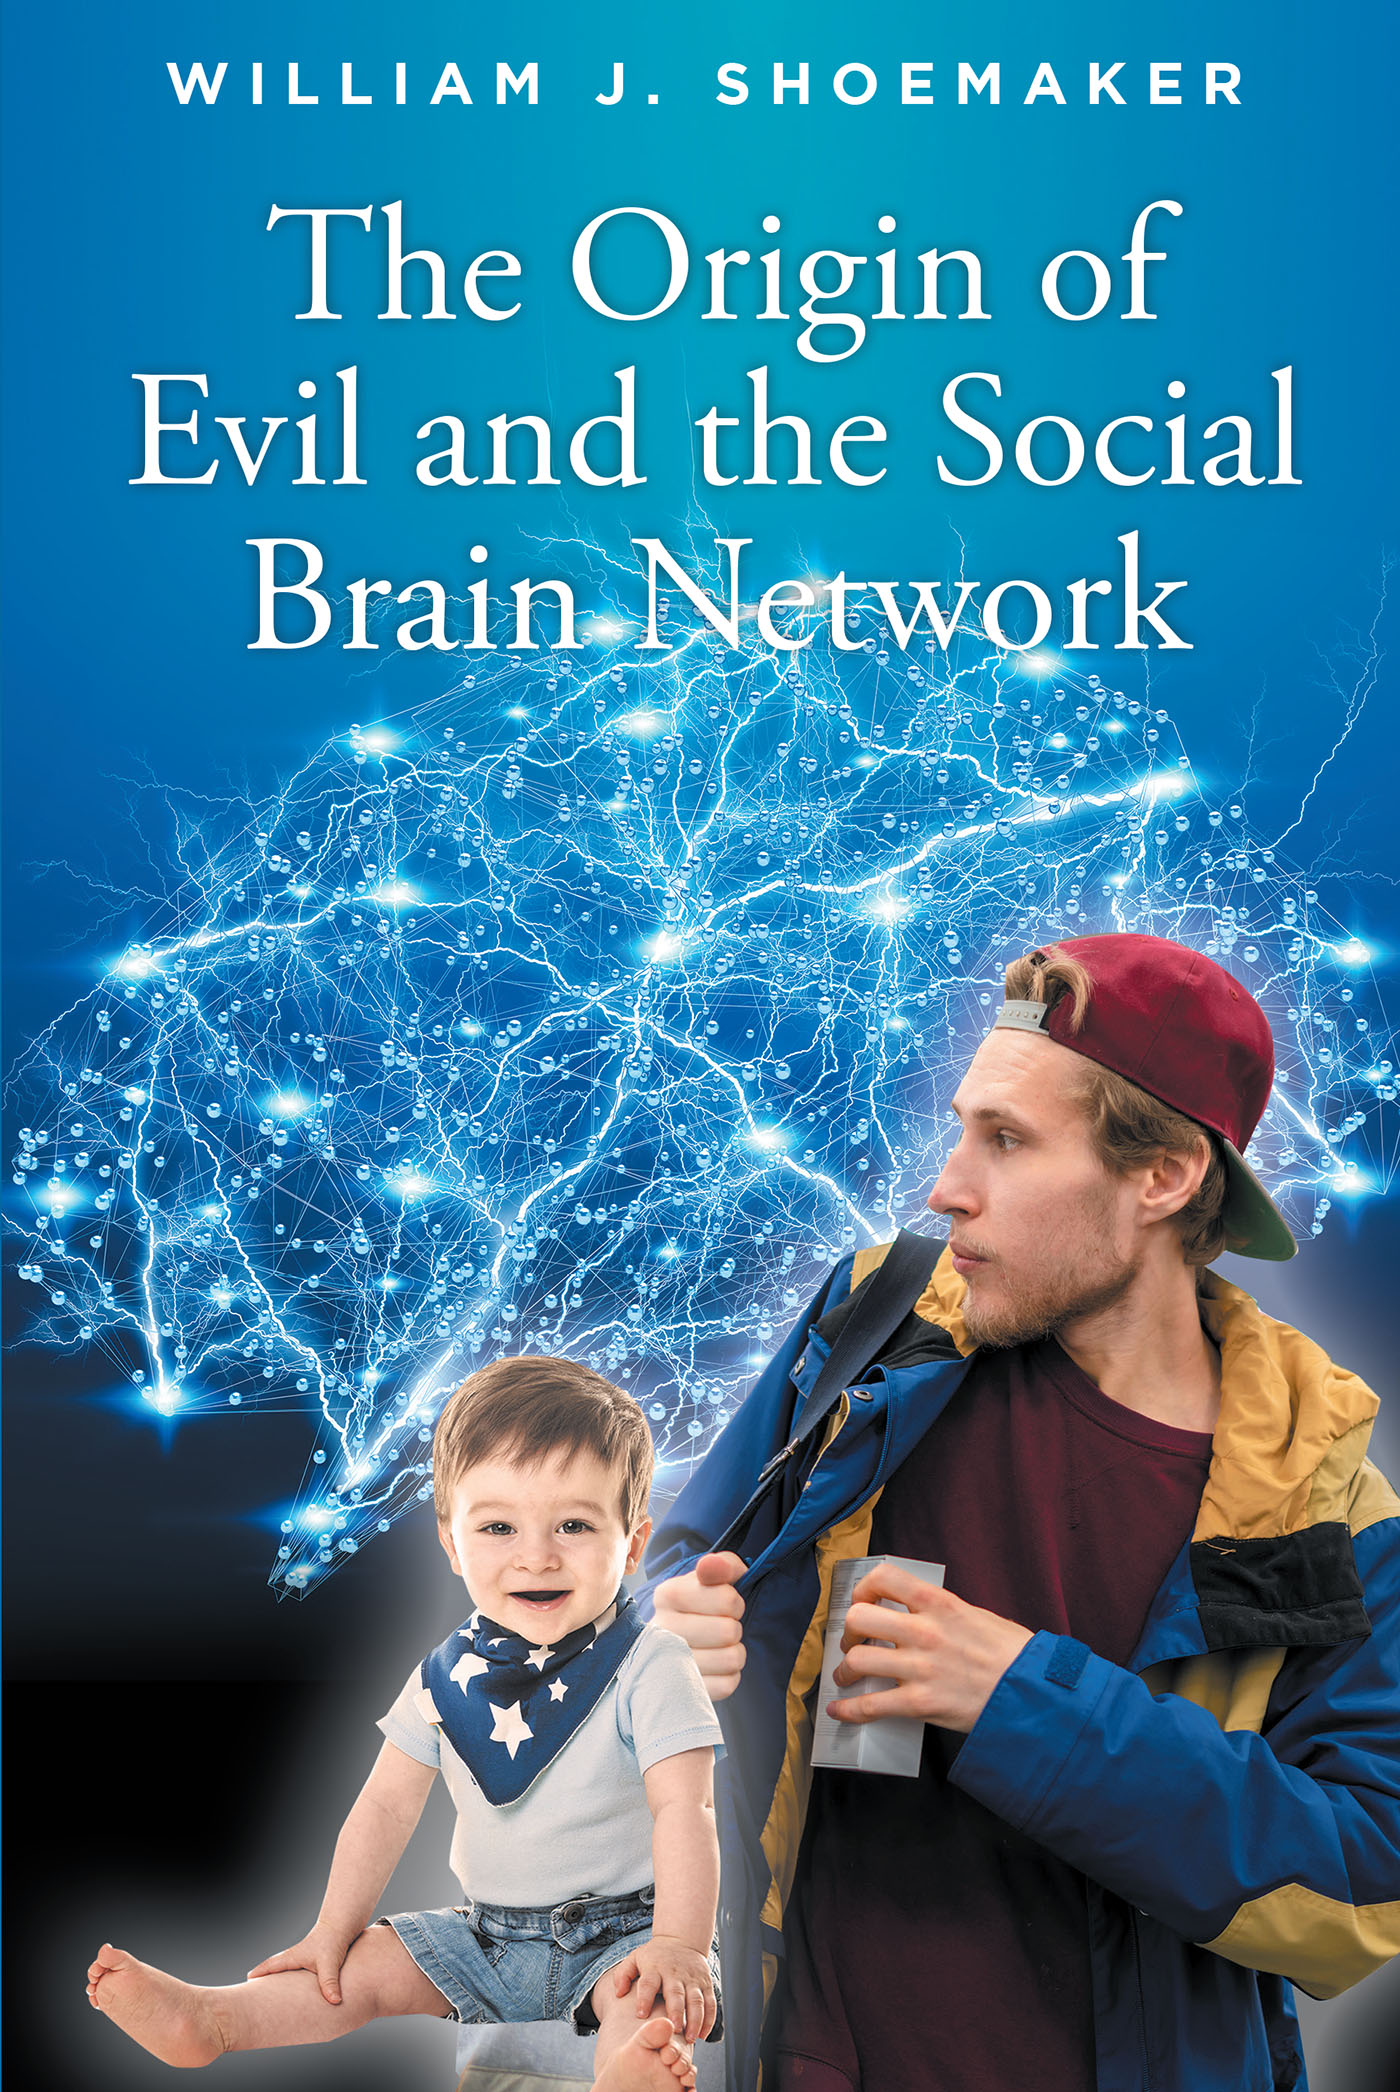 William J. Shoemaker’s New Book, “The Origin of Evil and the Social Brain Network,” Discusses How Evil is Primarily Enacted by Those with Psychopathic Brains